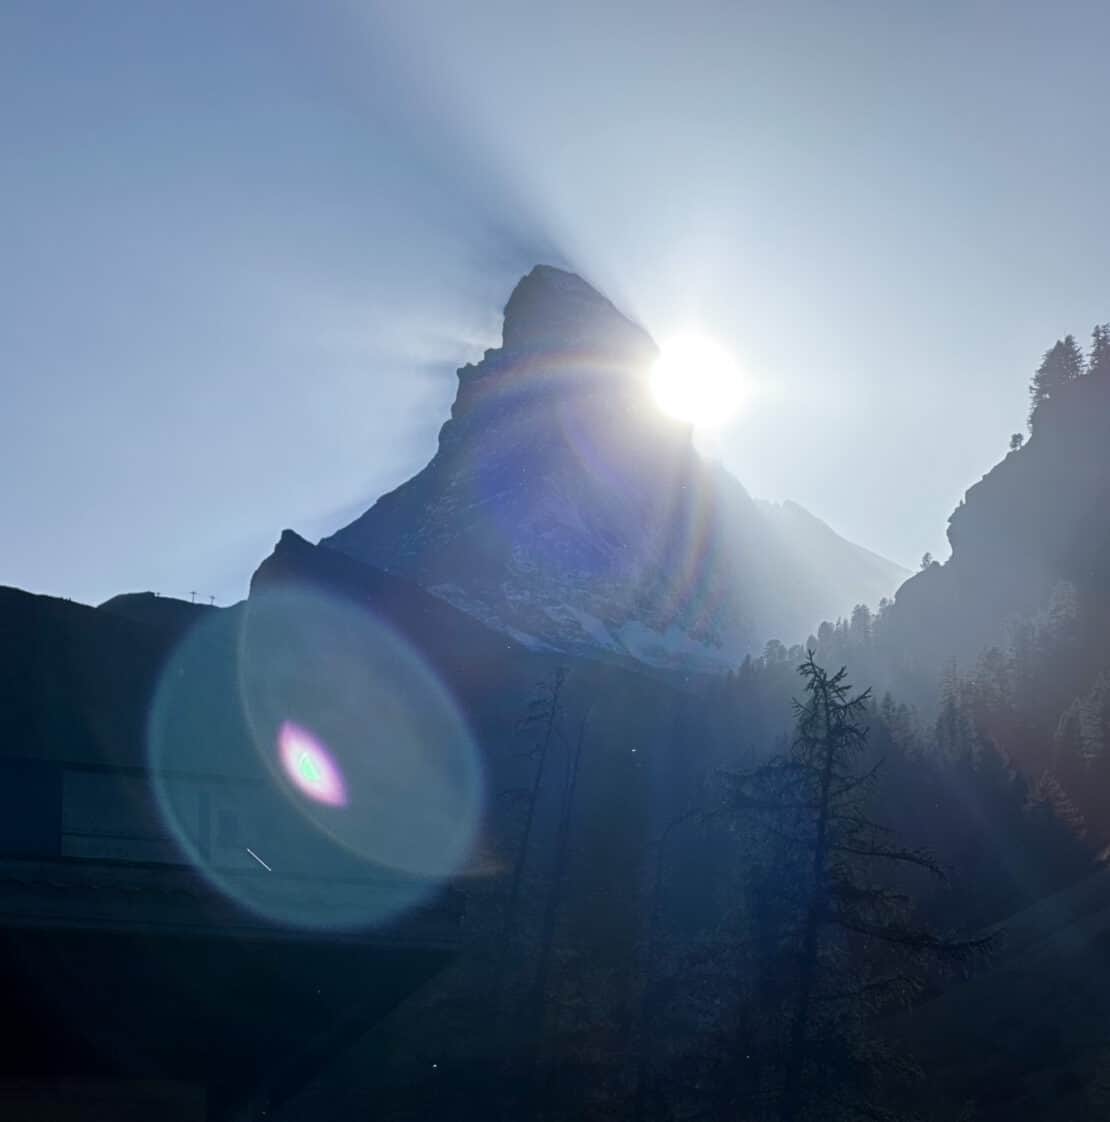 Silhouette of the Matterhorn with sun flares in Switzerland